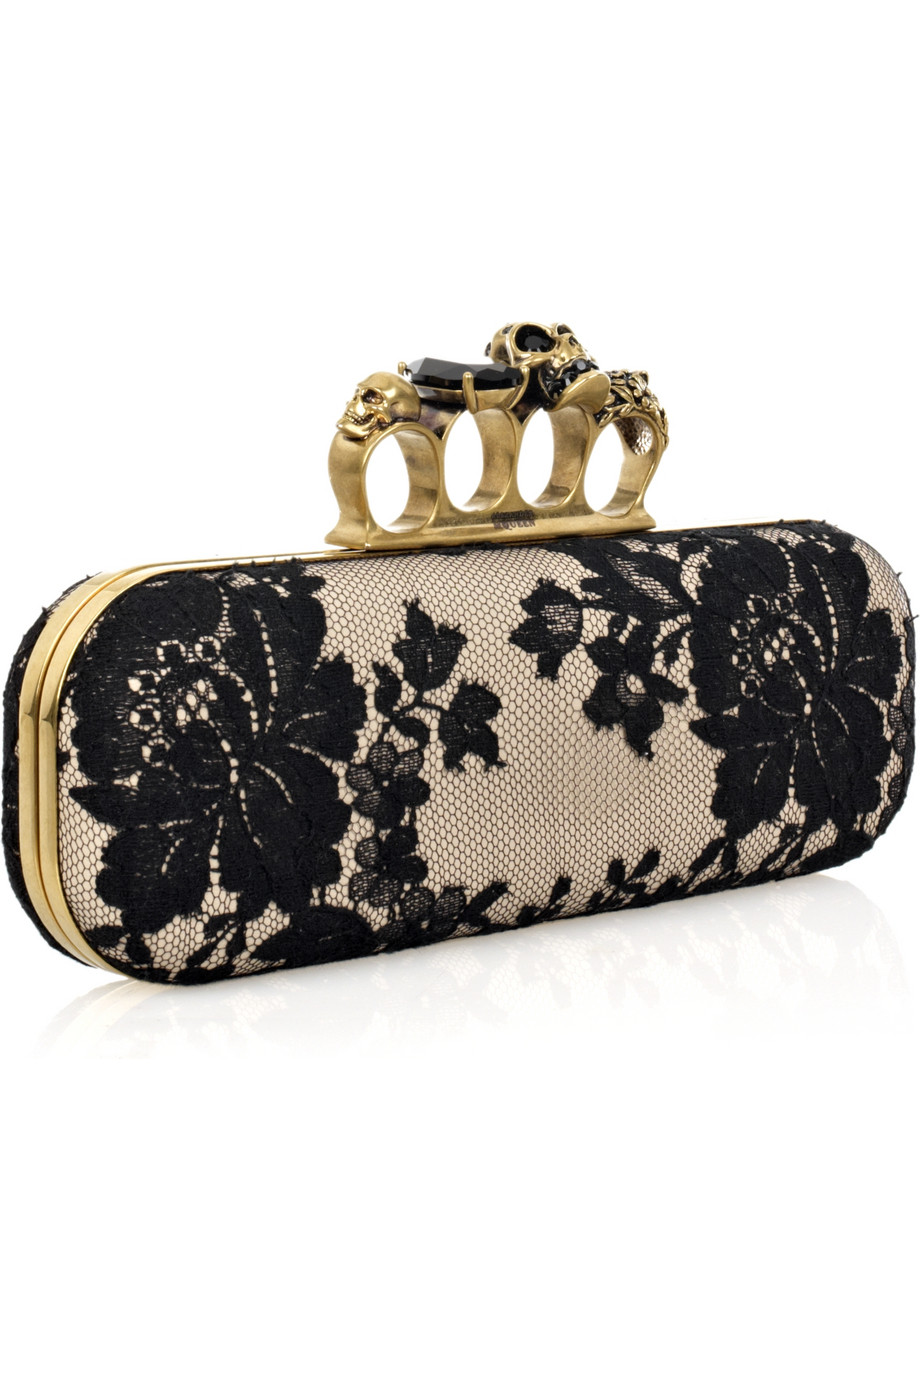 Lyst - Alexander Mcqueen Knuckle Duster Box Clutch in Natural